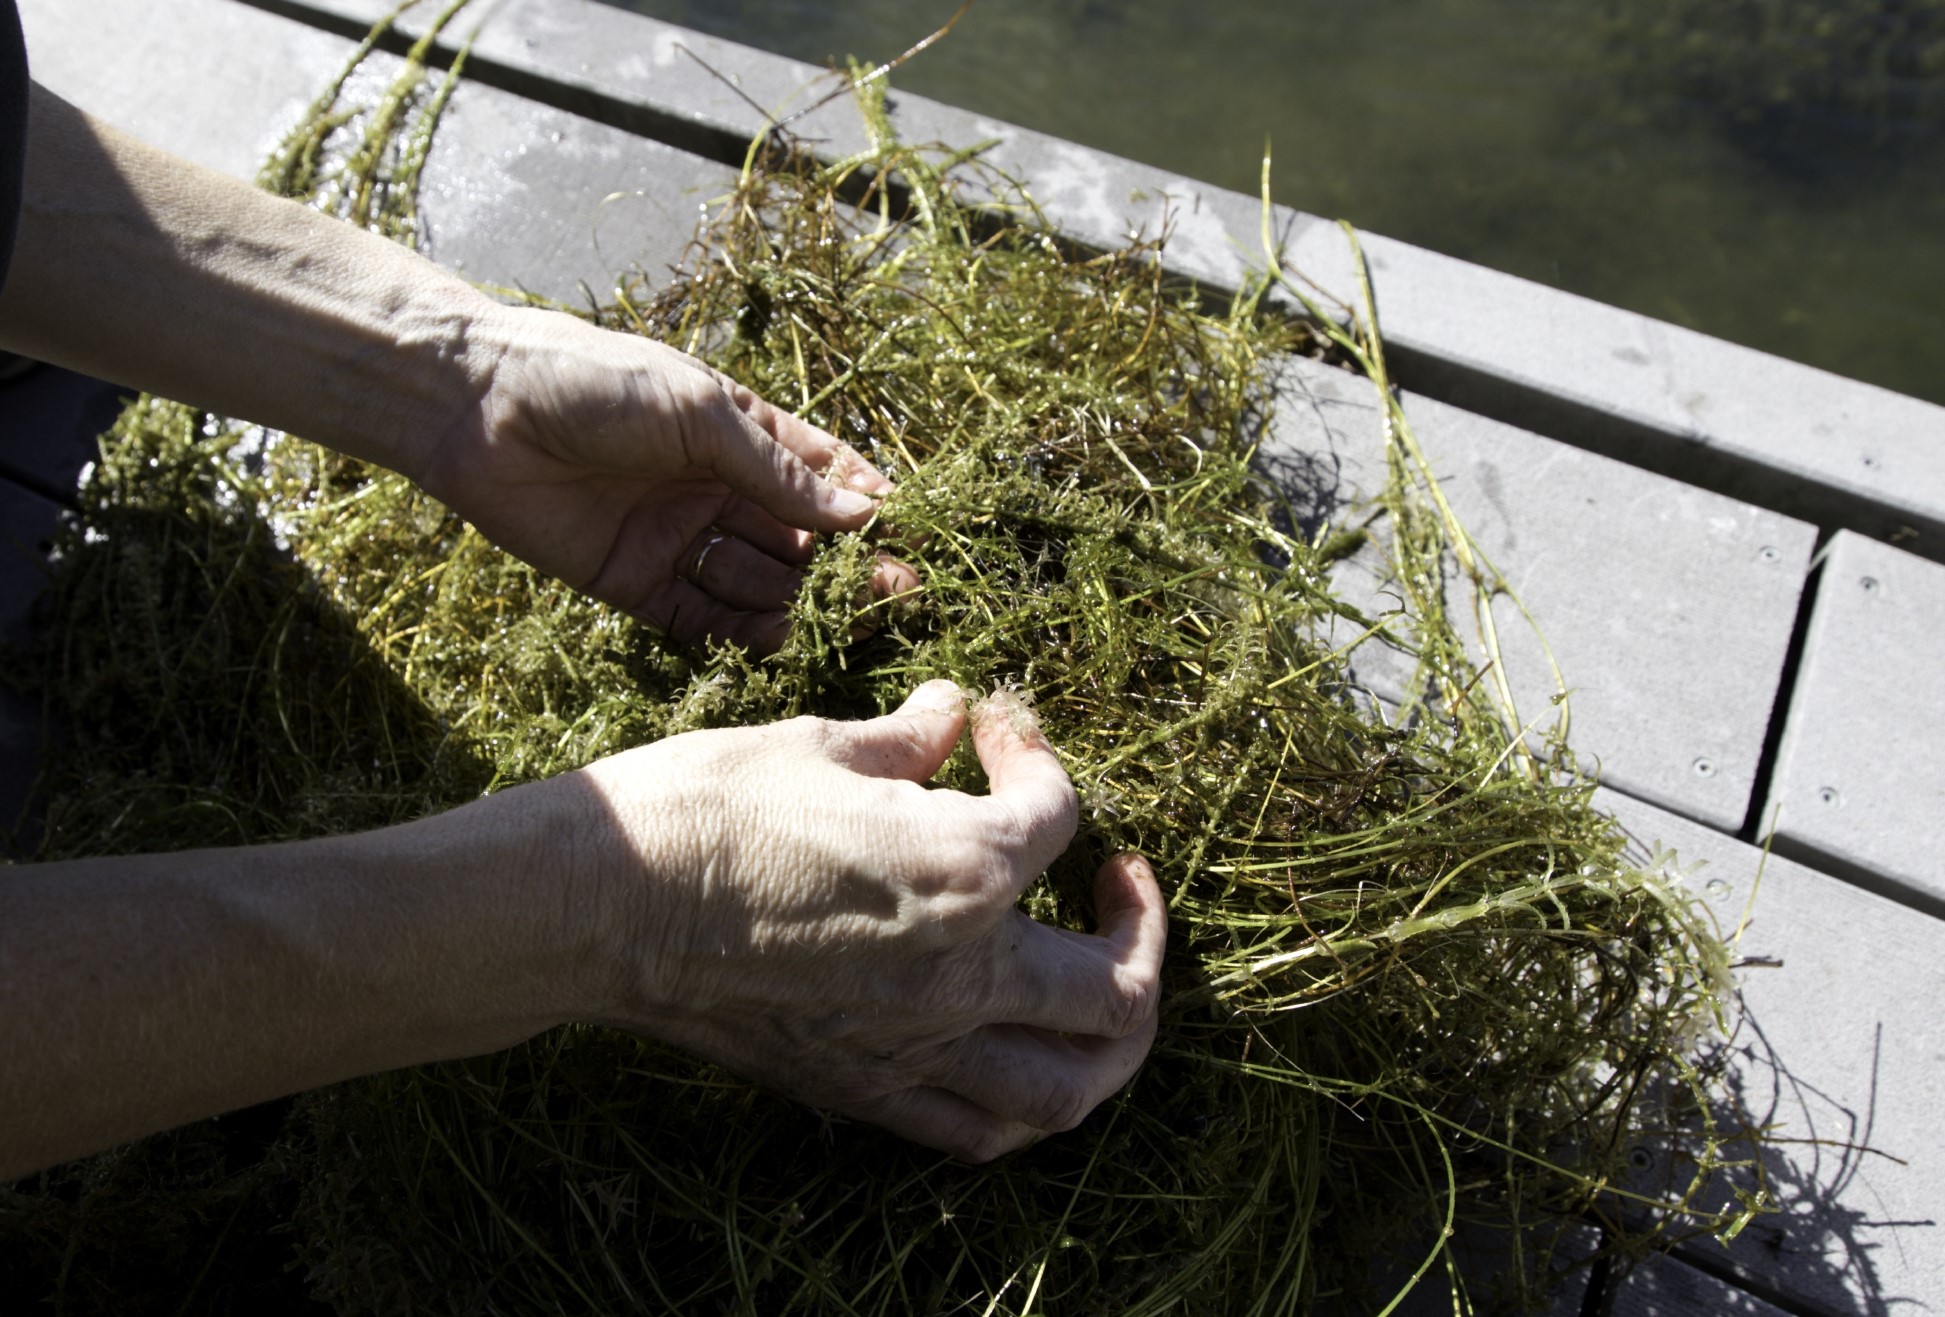 Eradication of ‘perfect weed' hydrilla nears due to collaboration, public awareness